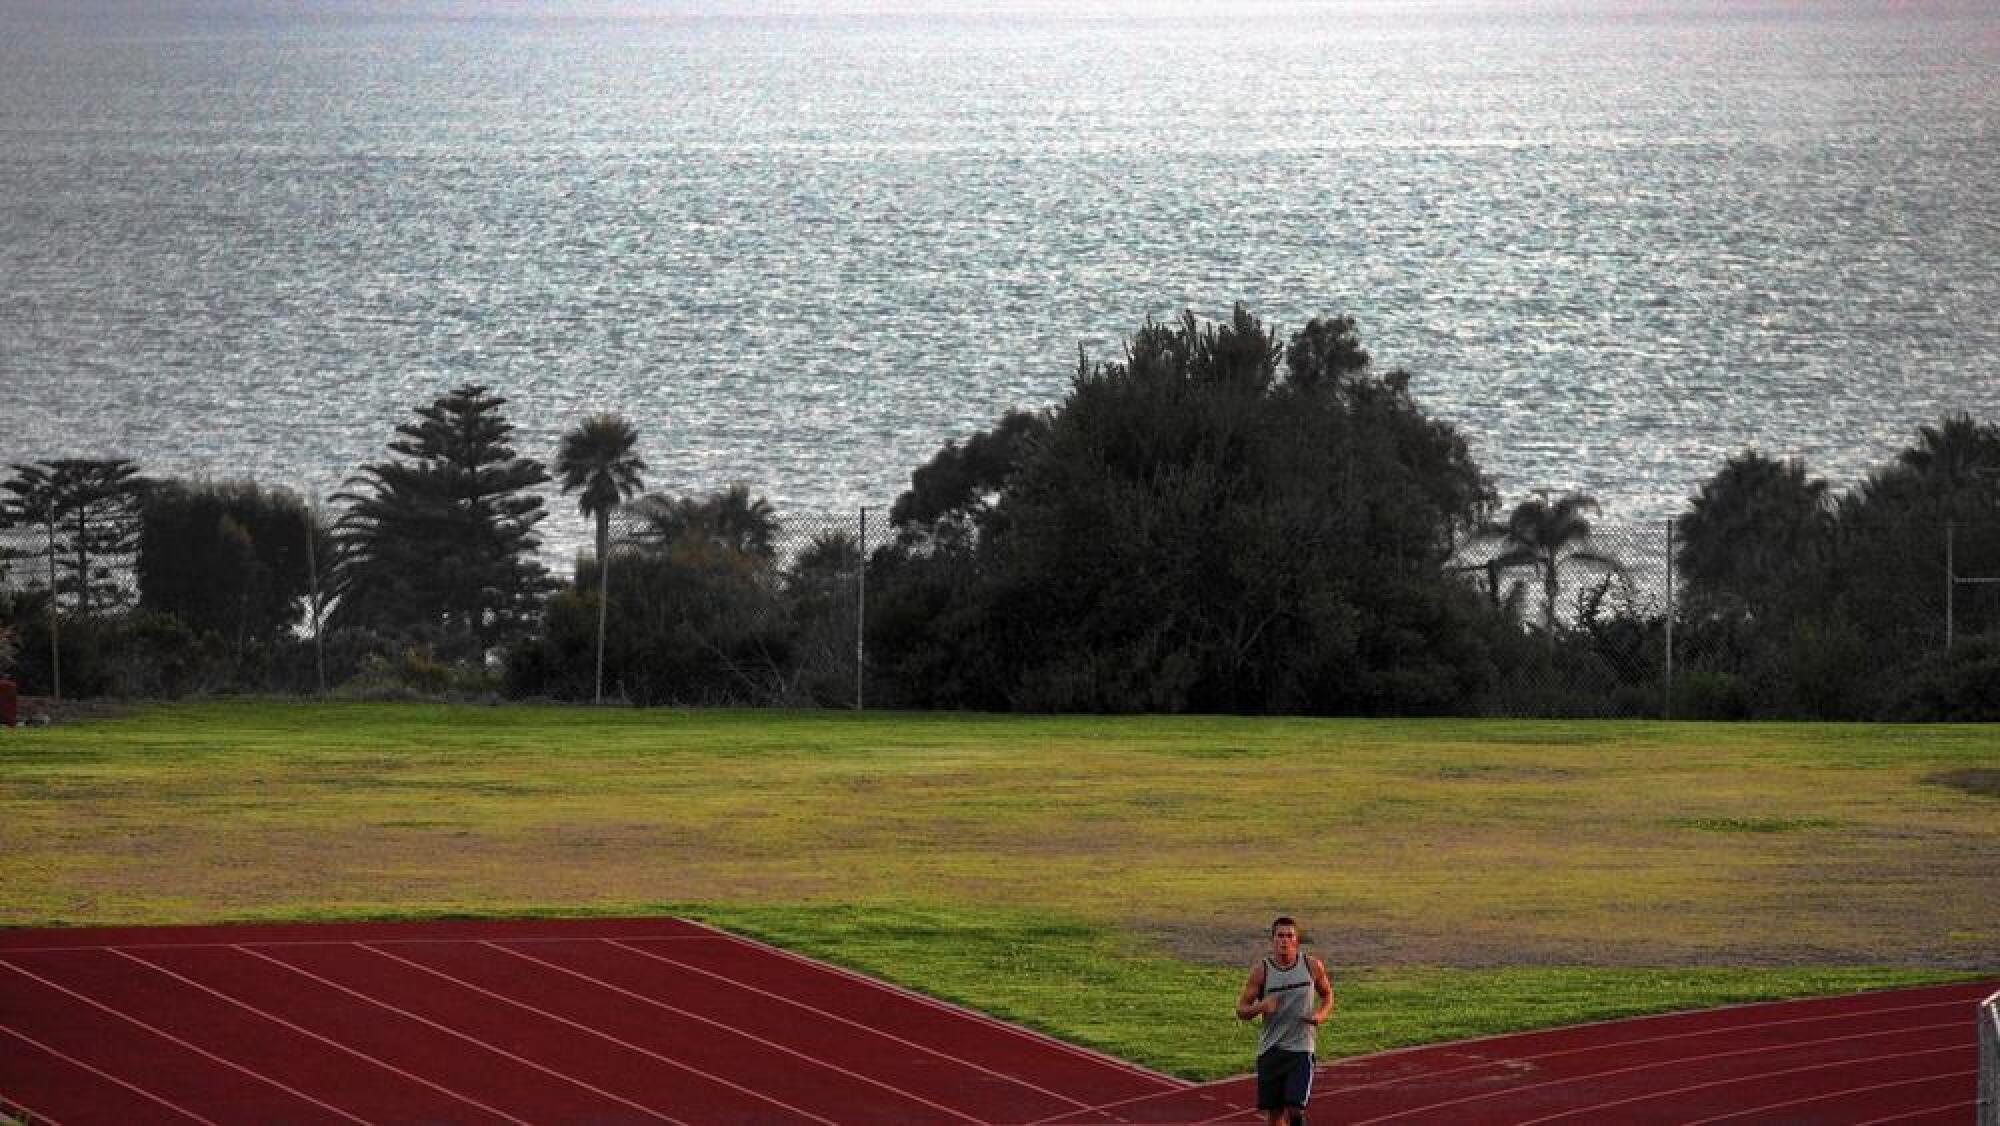 A runner on a track with the ocean in the background.